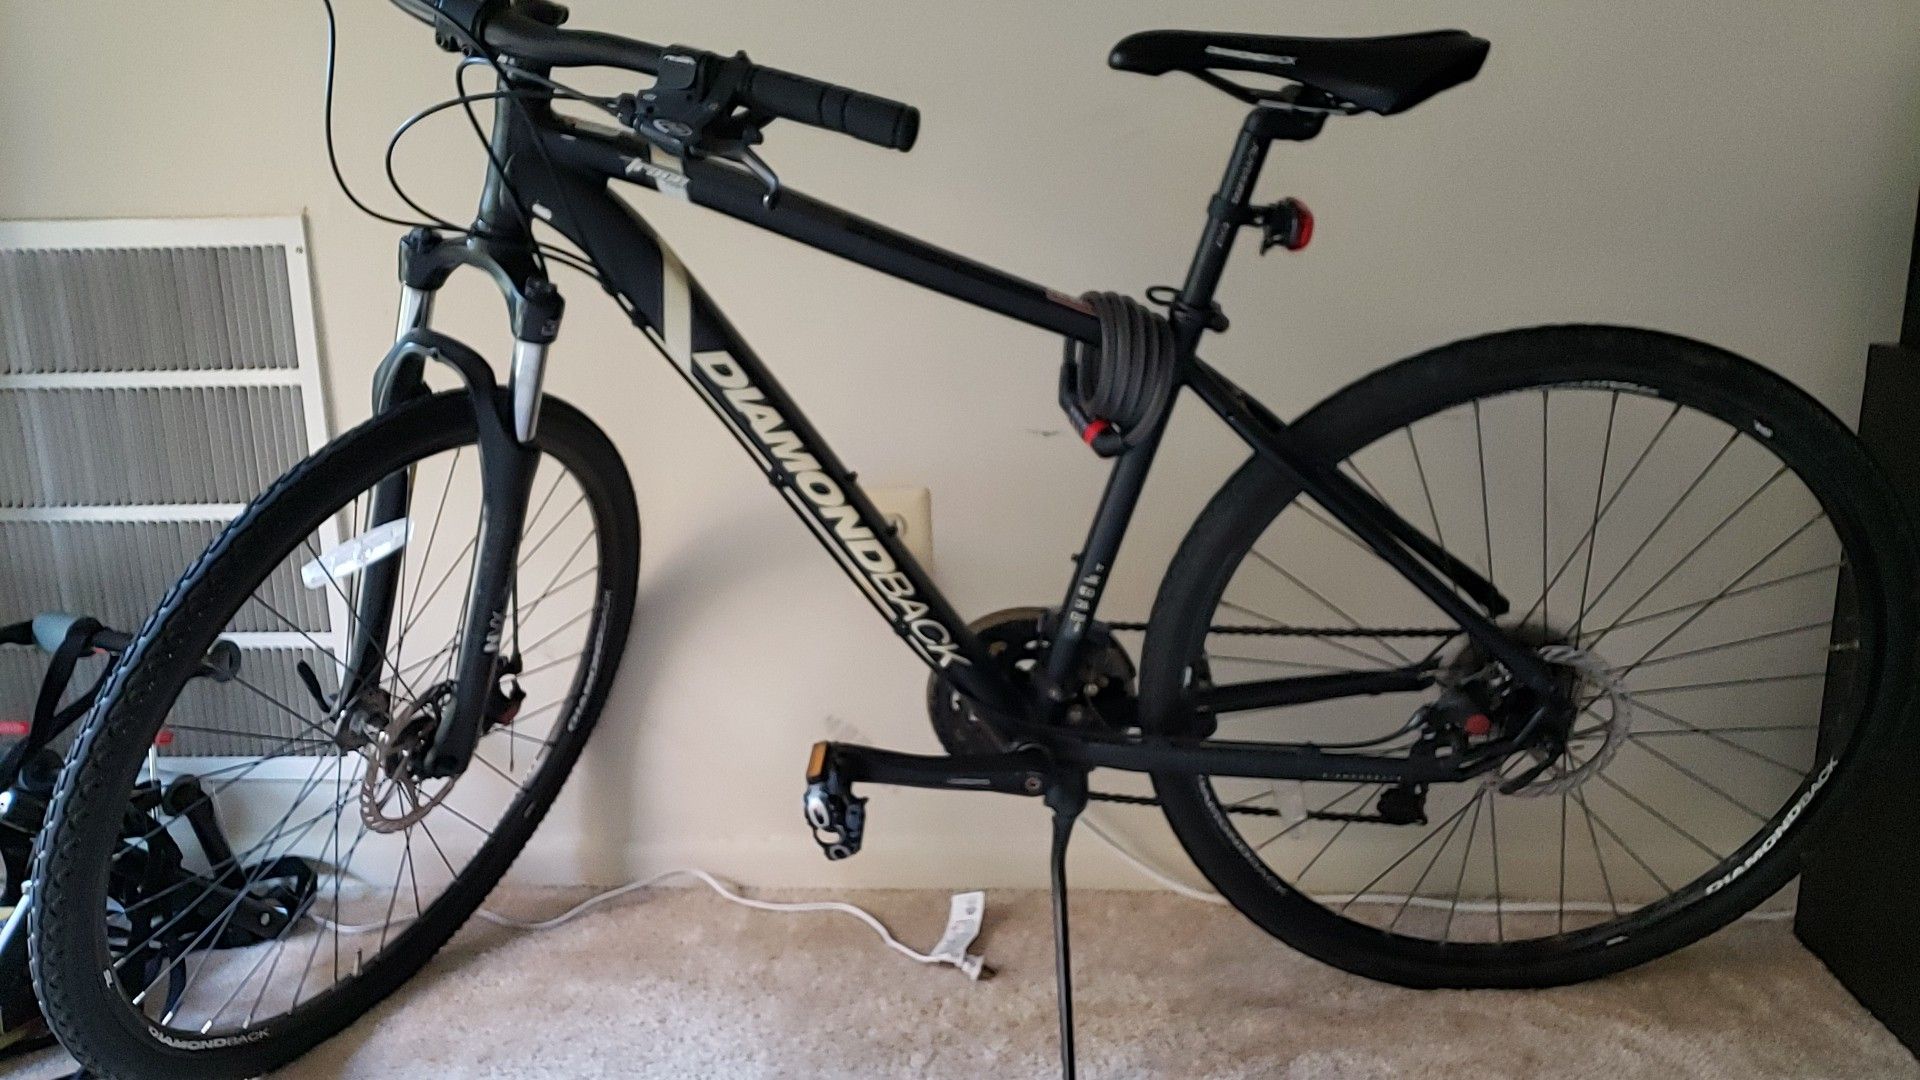 Hybrid Diamondback bike with accessories - for commute/mountain or road ride, barely used